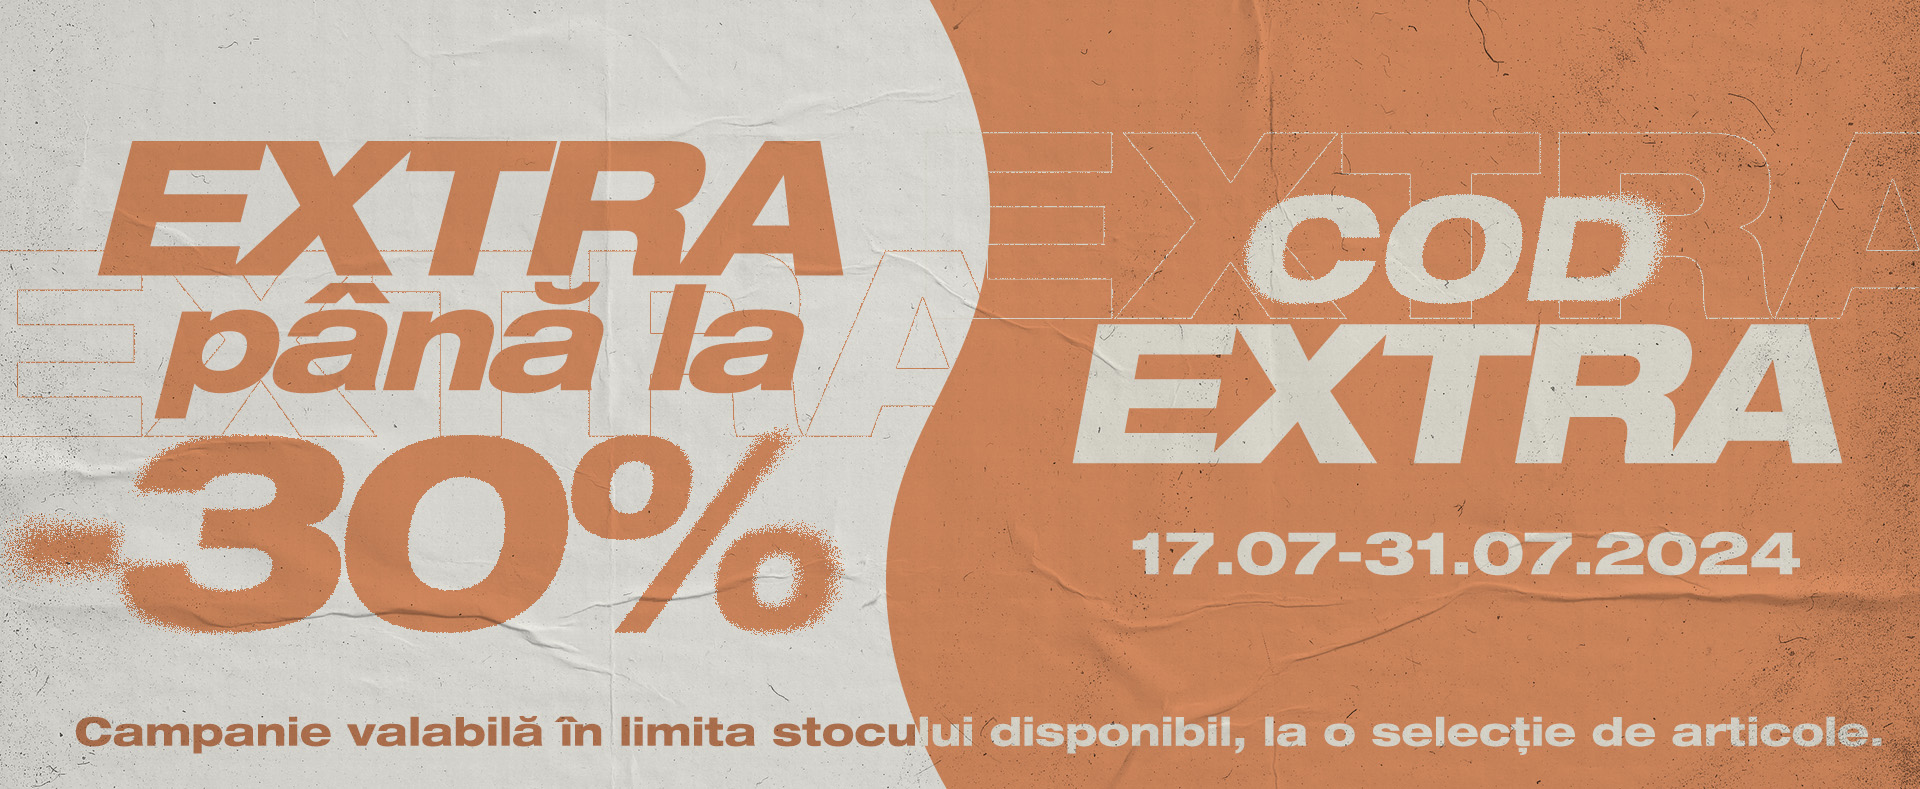  EXTRA up to -30% cod EXTRA